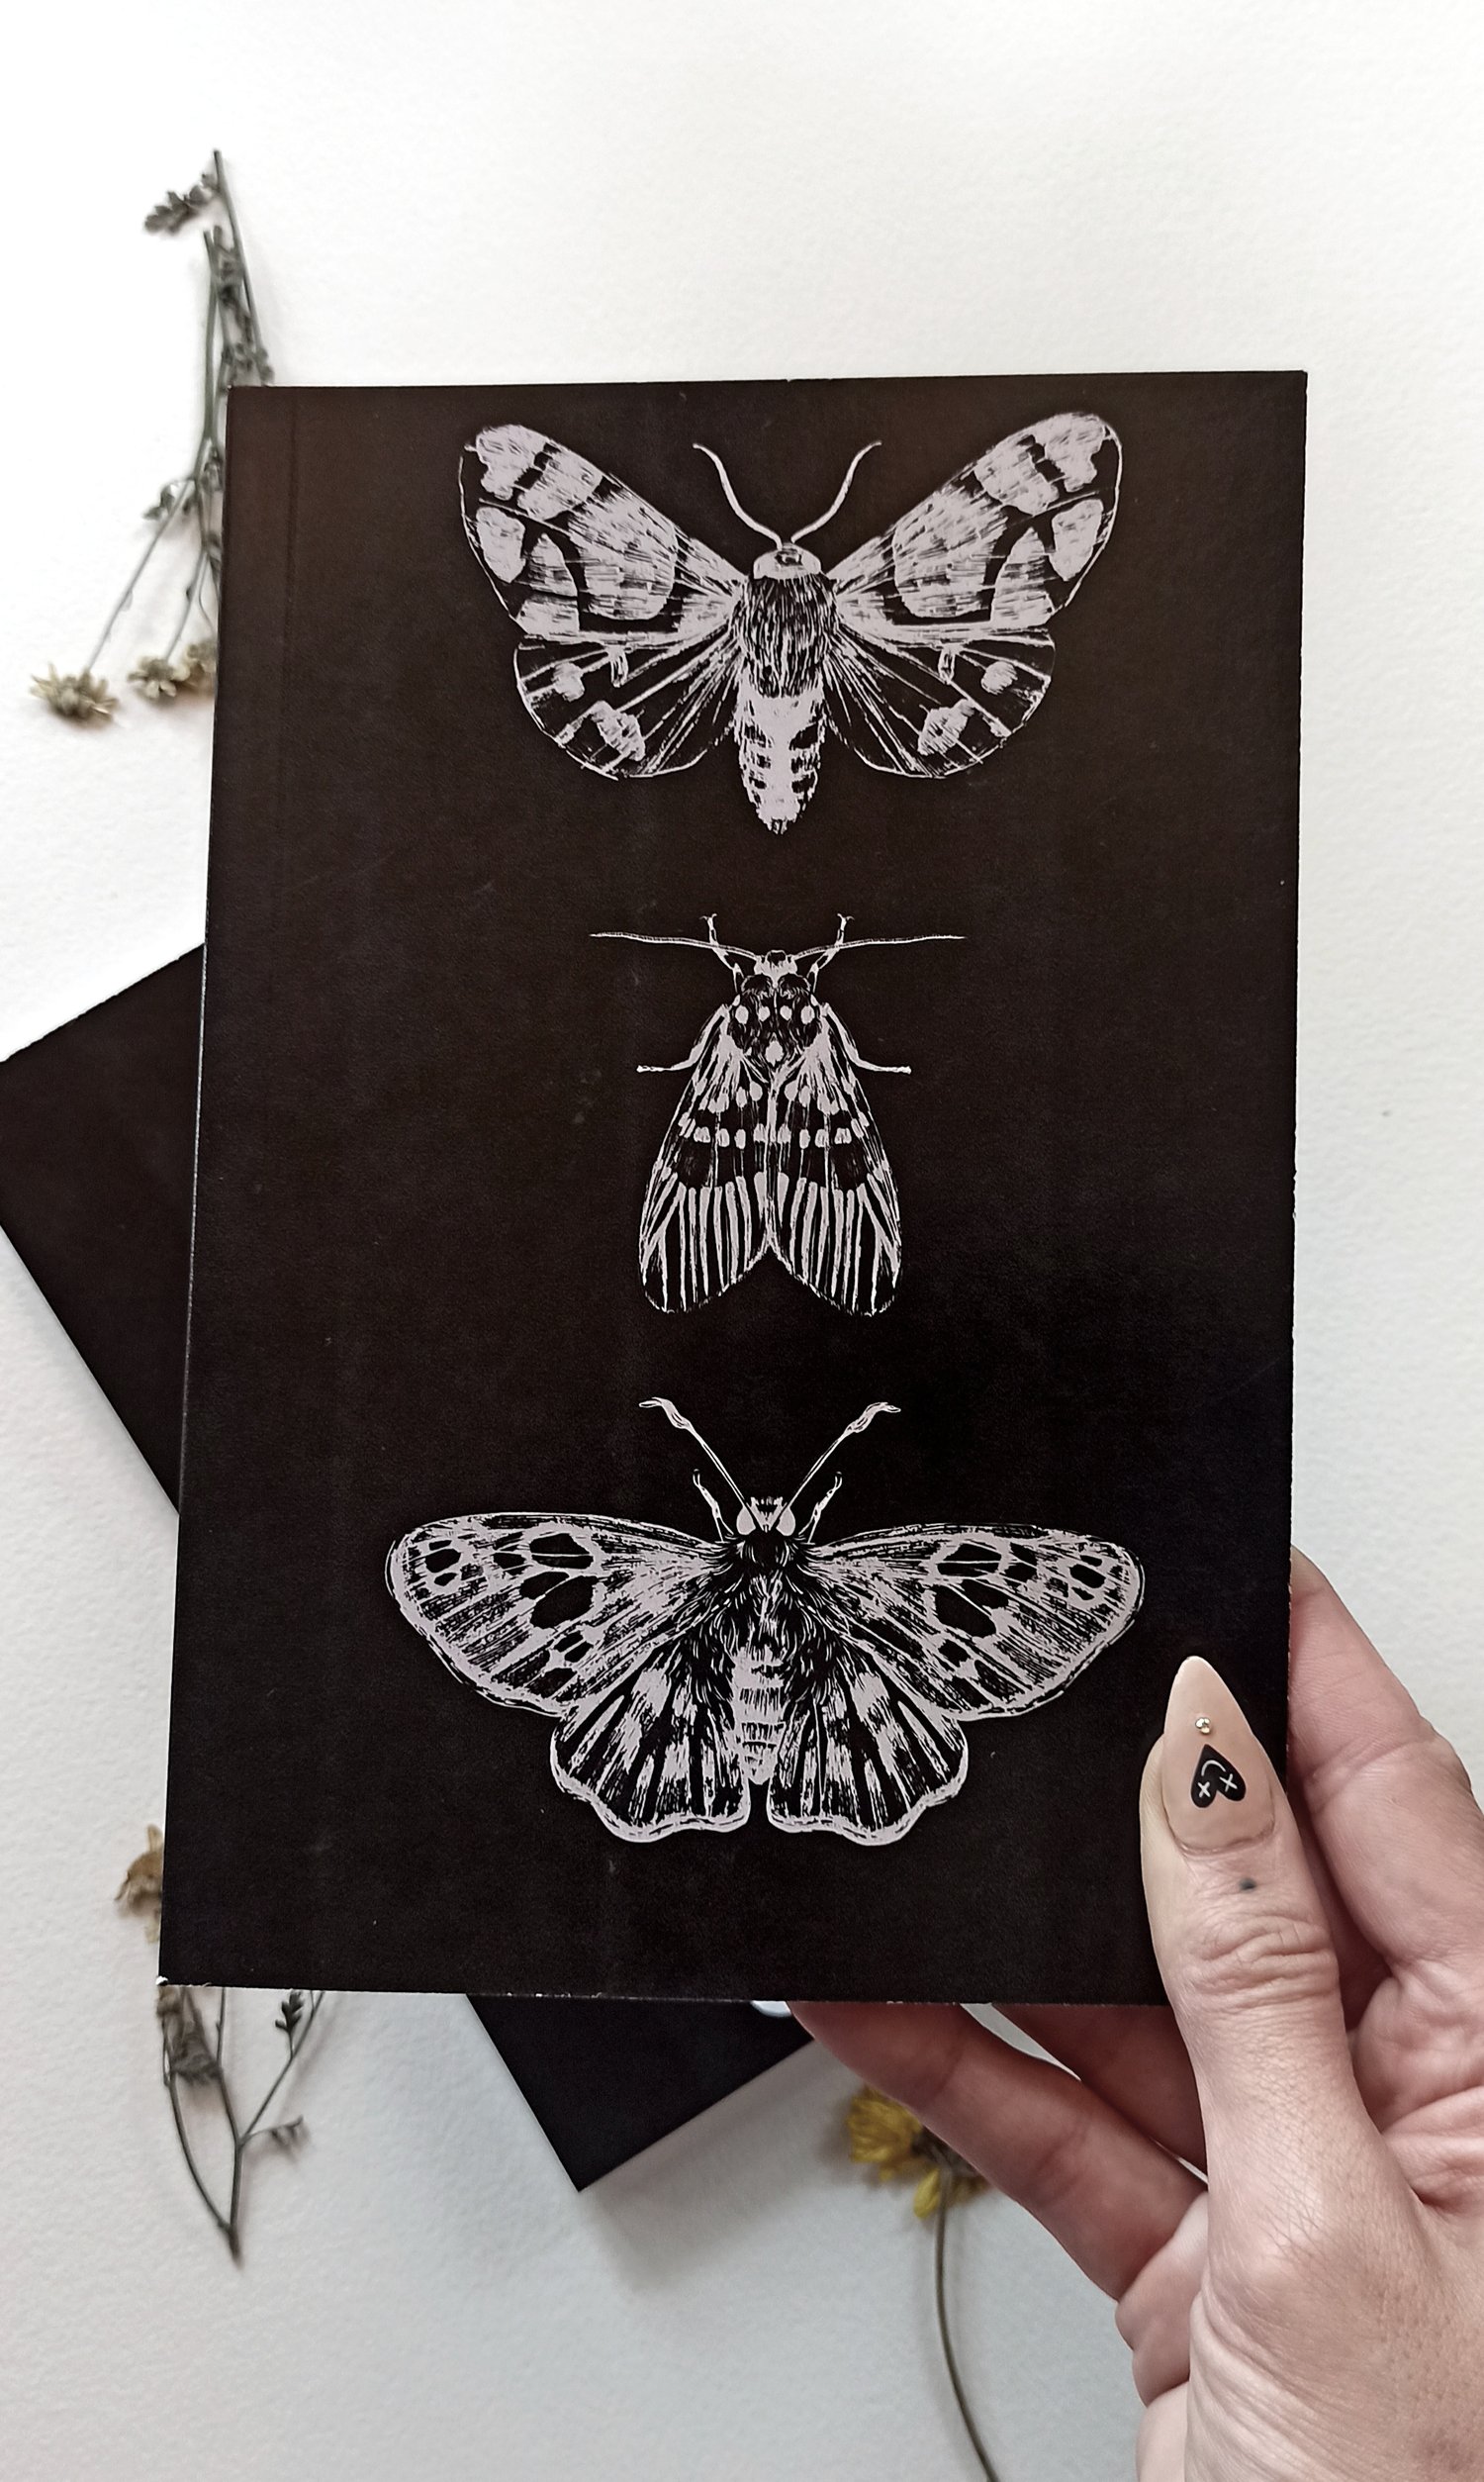 Image of Black Notebook with Moths